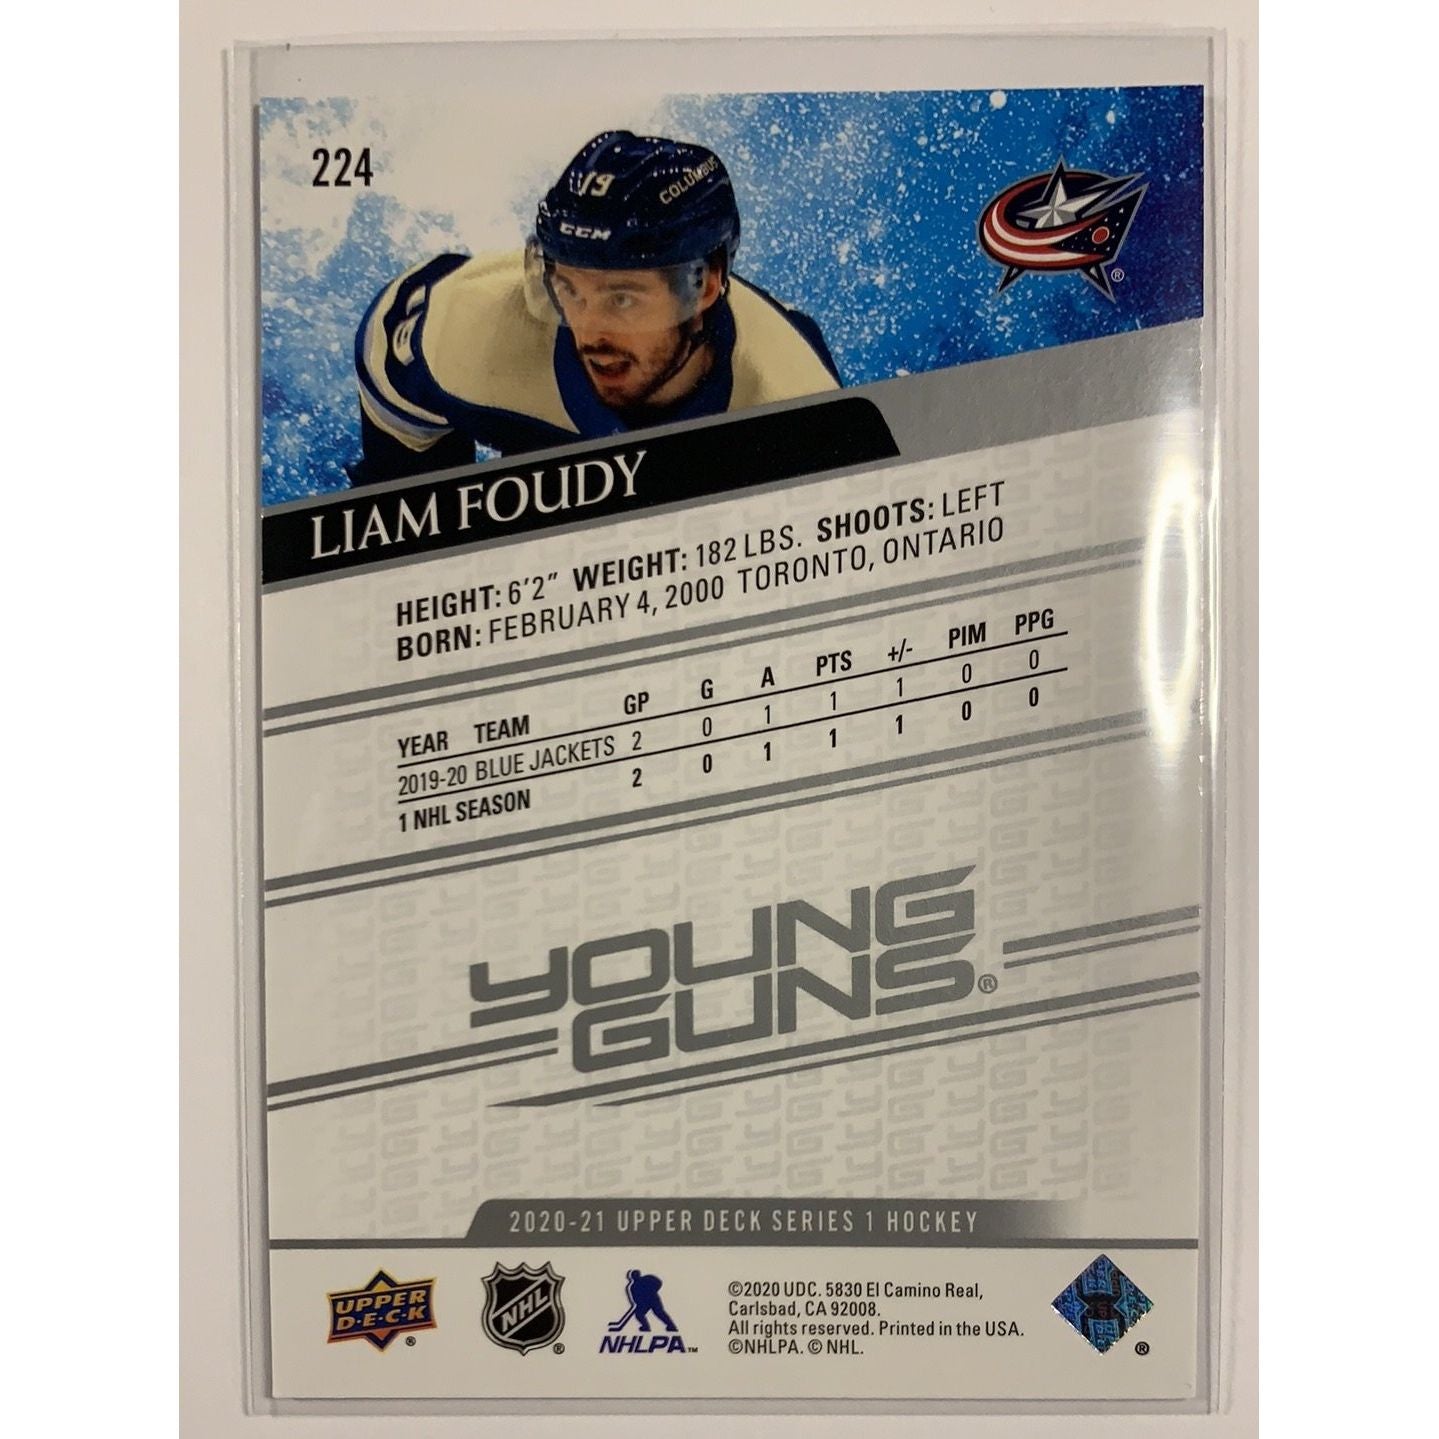  2020-21 Upper Deck Series 1 Liam Foudy Young Guns  Local Legends Cards & Collectibles